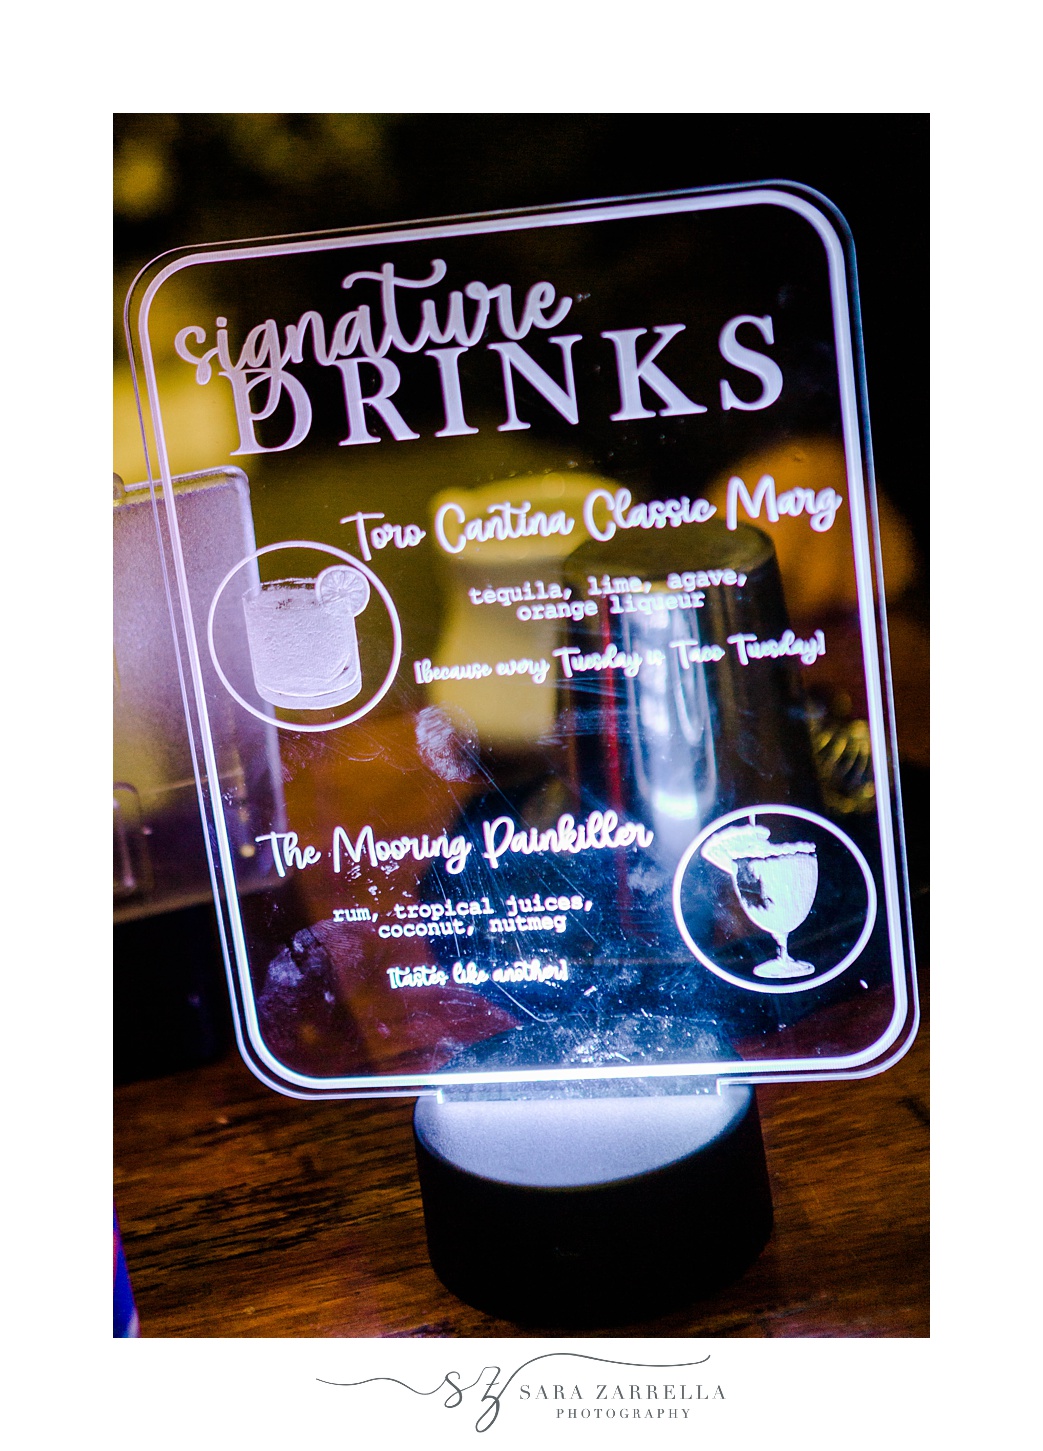 acrylic sign for signature drinks at OceanCliff Hotel wedding reception